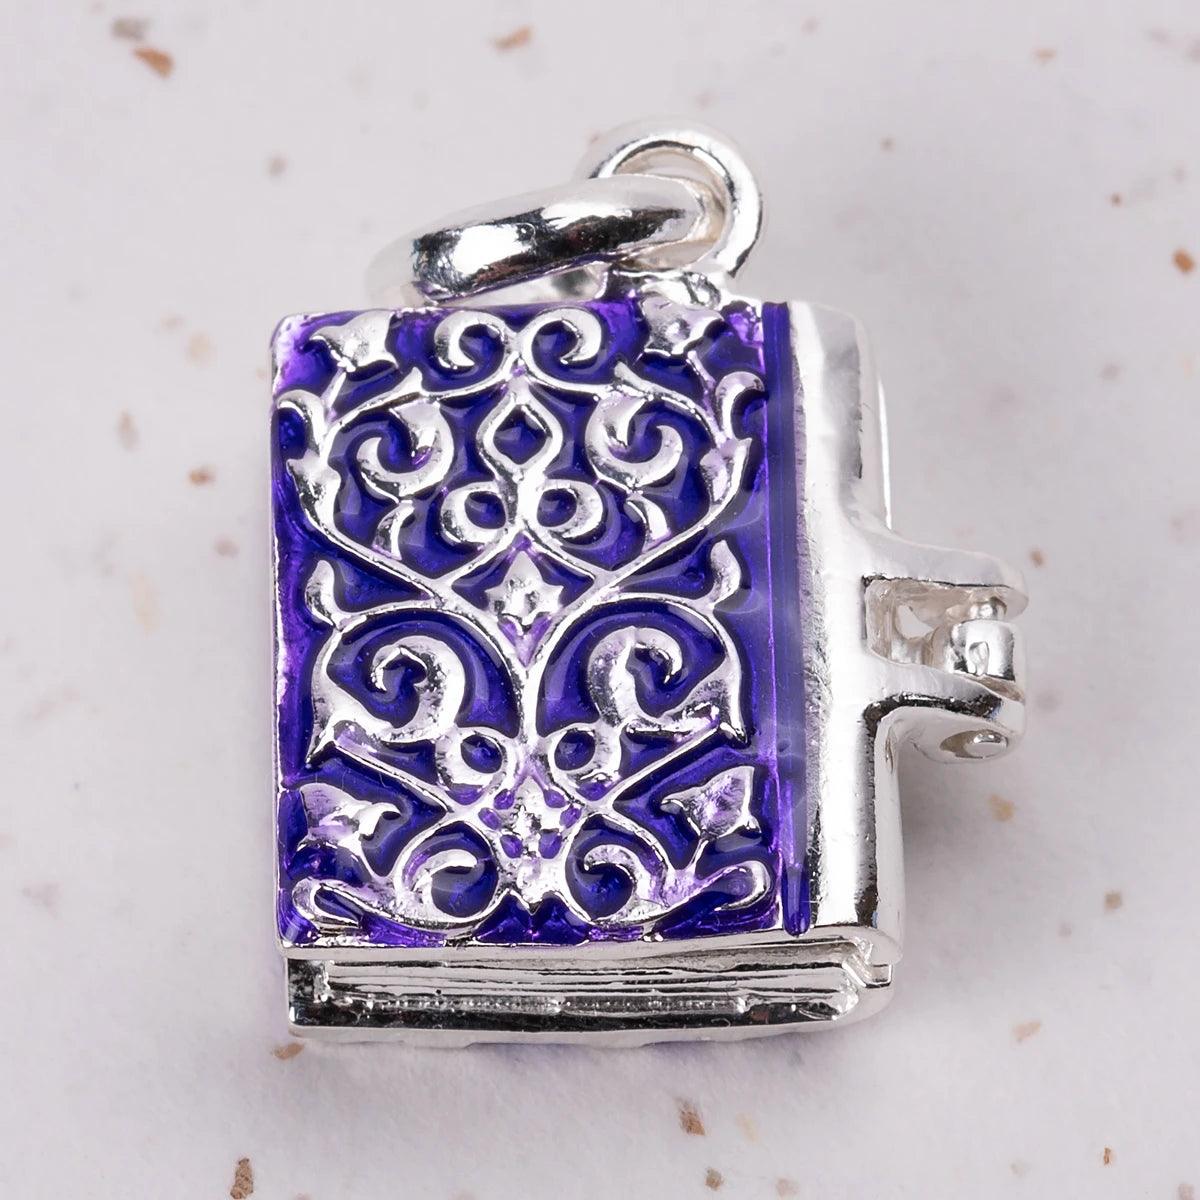 Mansfield Park Silver and Enamel Book Charm City